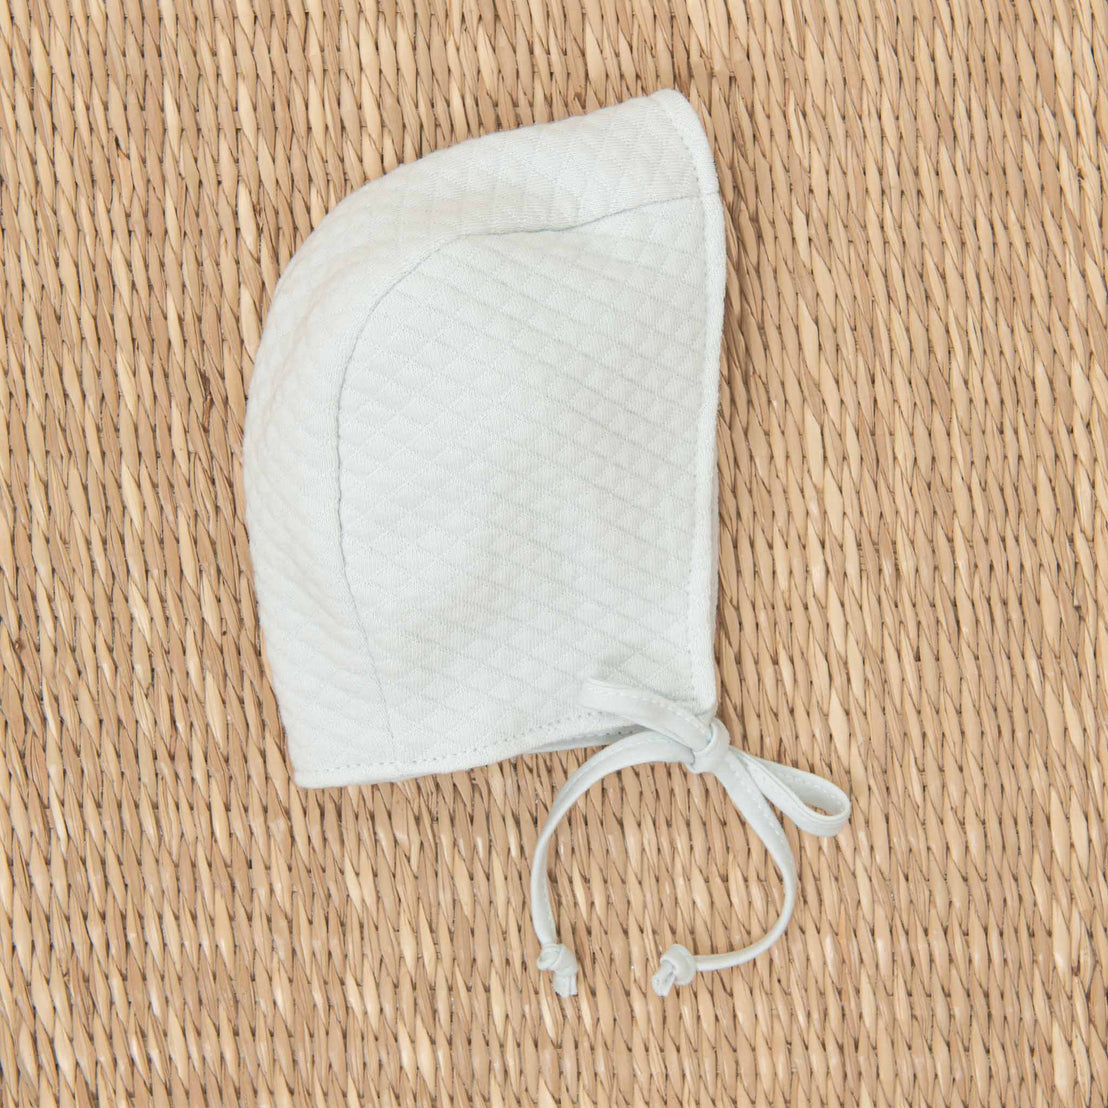 A white Aiden Quilt Bonnet with tie strings, perfect for coming home from the hospital, placed neatly on a straw-textured background.